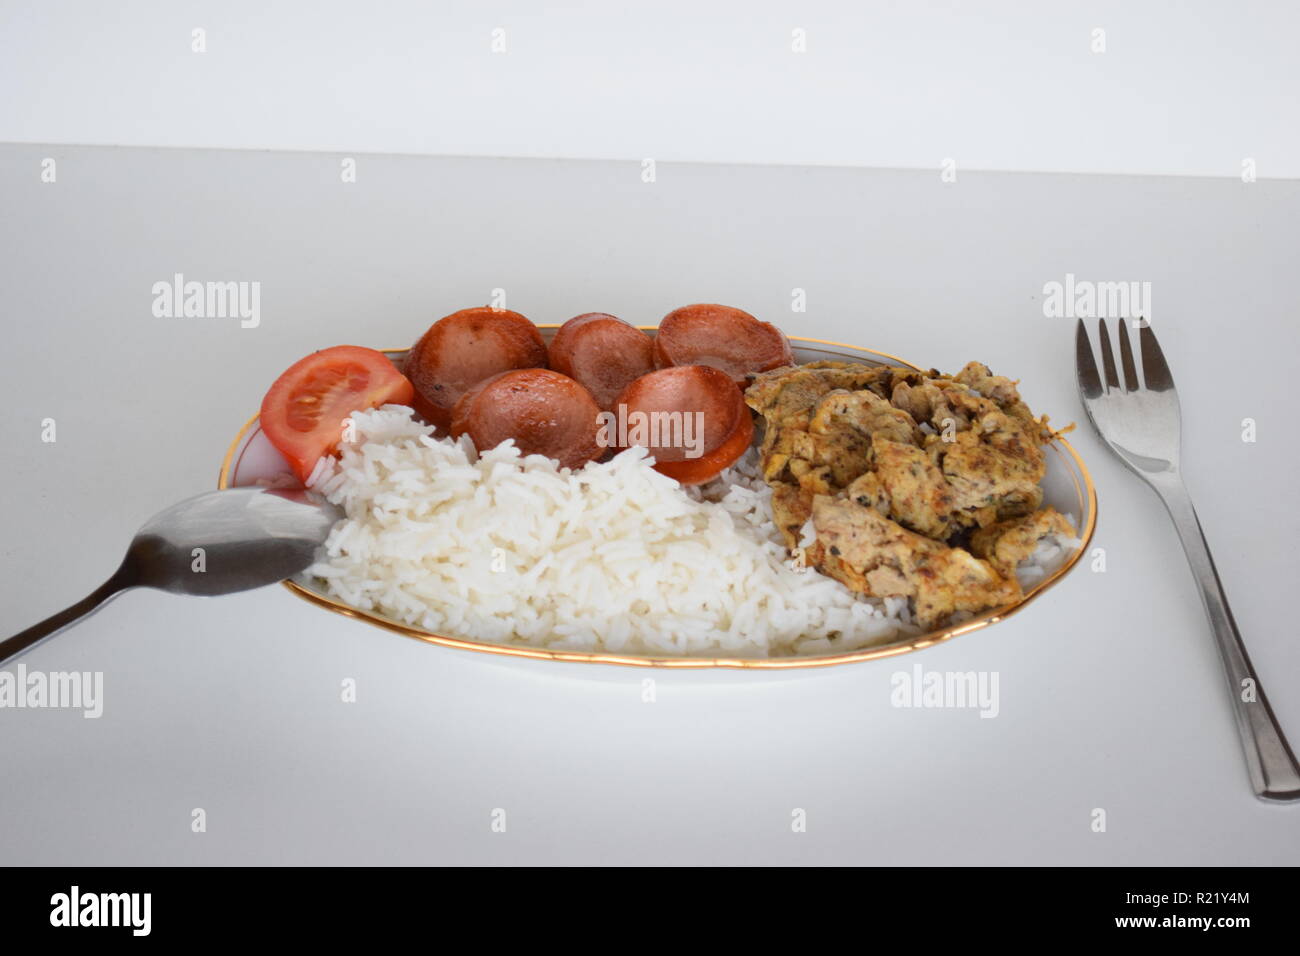 A freshly cooked breakfast of egg, Lyoner sausage, tomatoes and rice at Lety’s Transient Homes Baguio, B&B. Ein frisch zubereitetes Frühstück Stock Photo